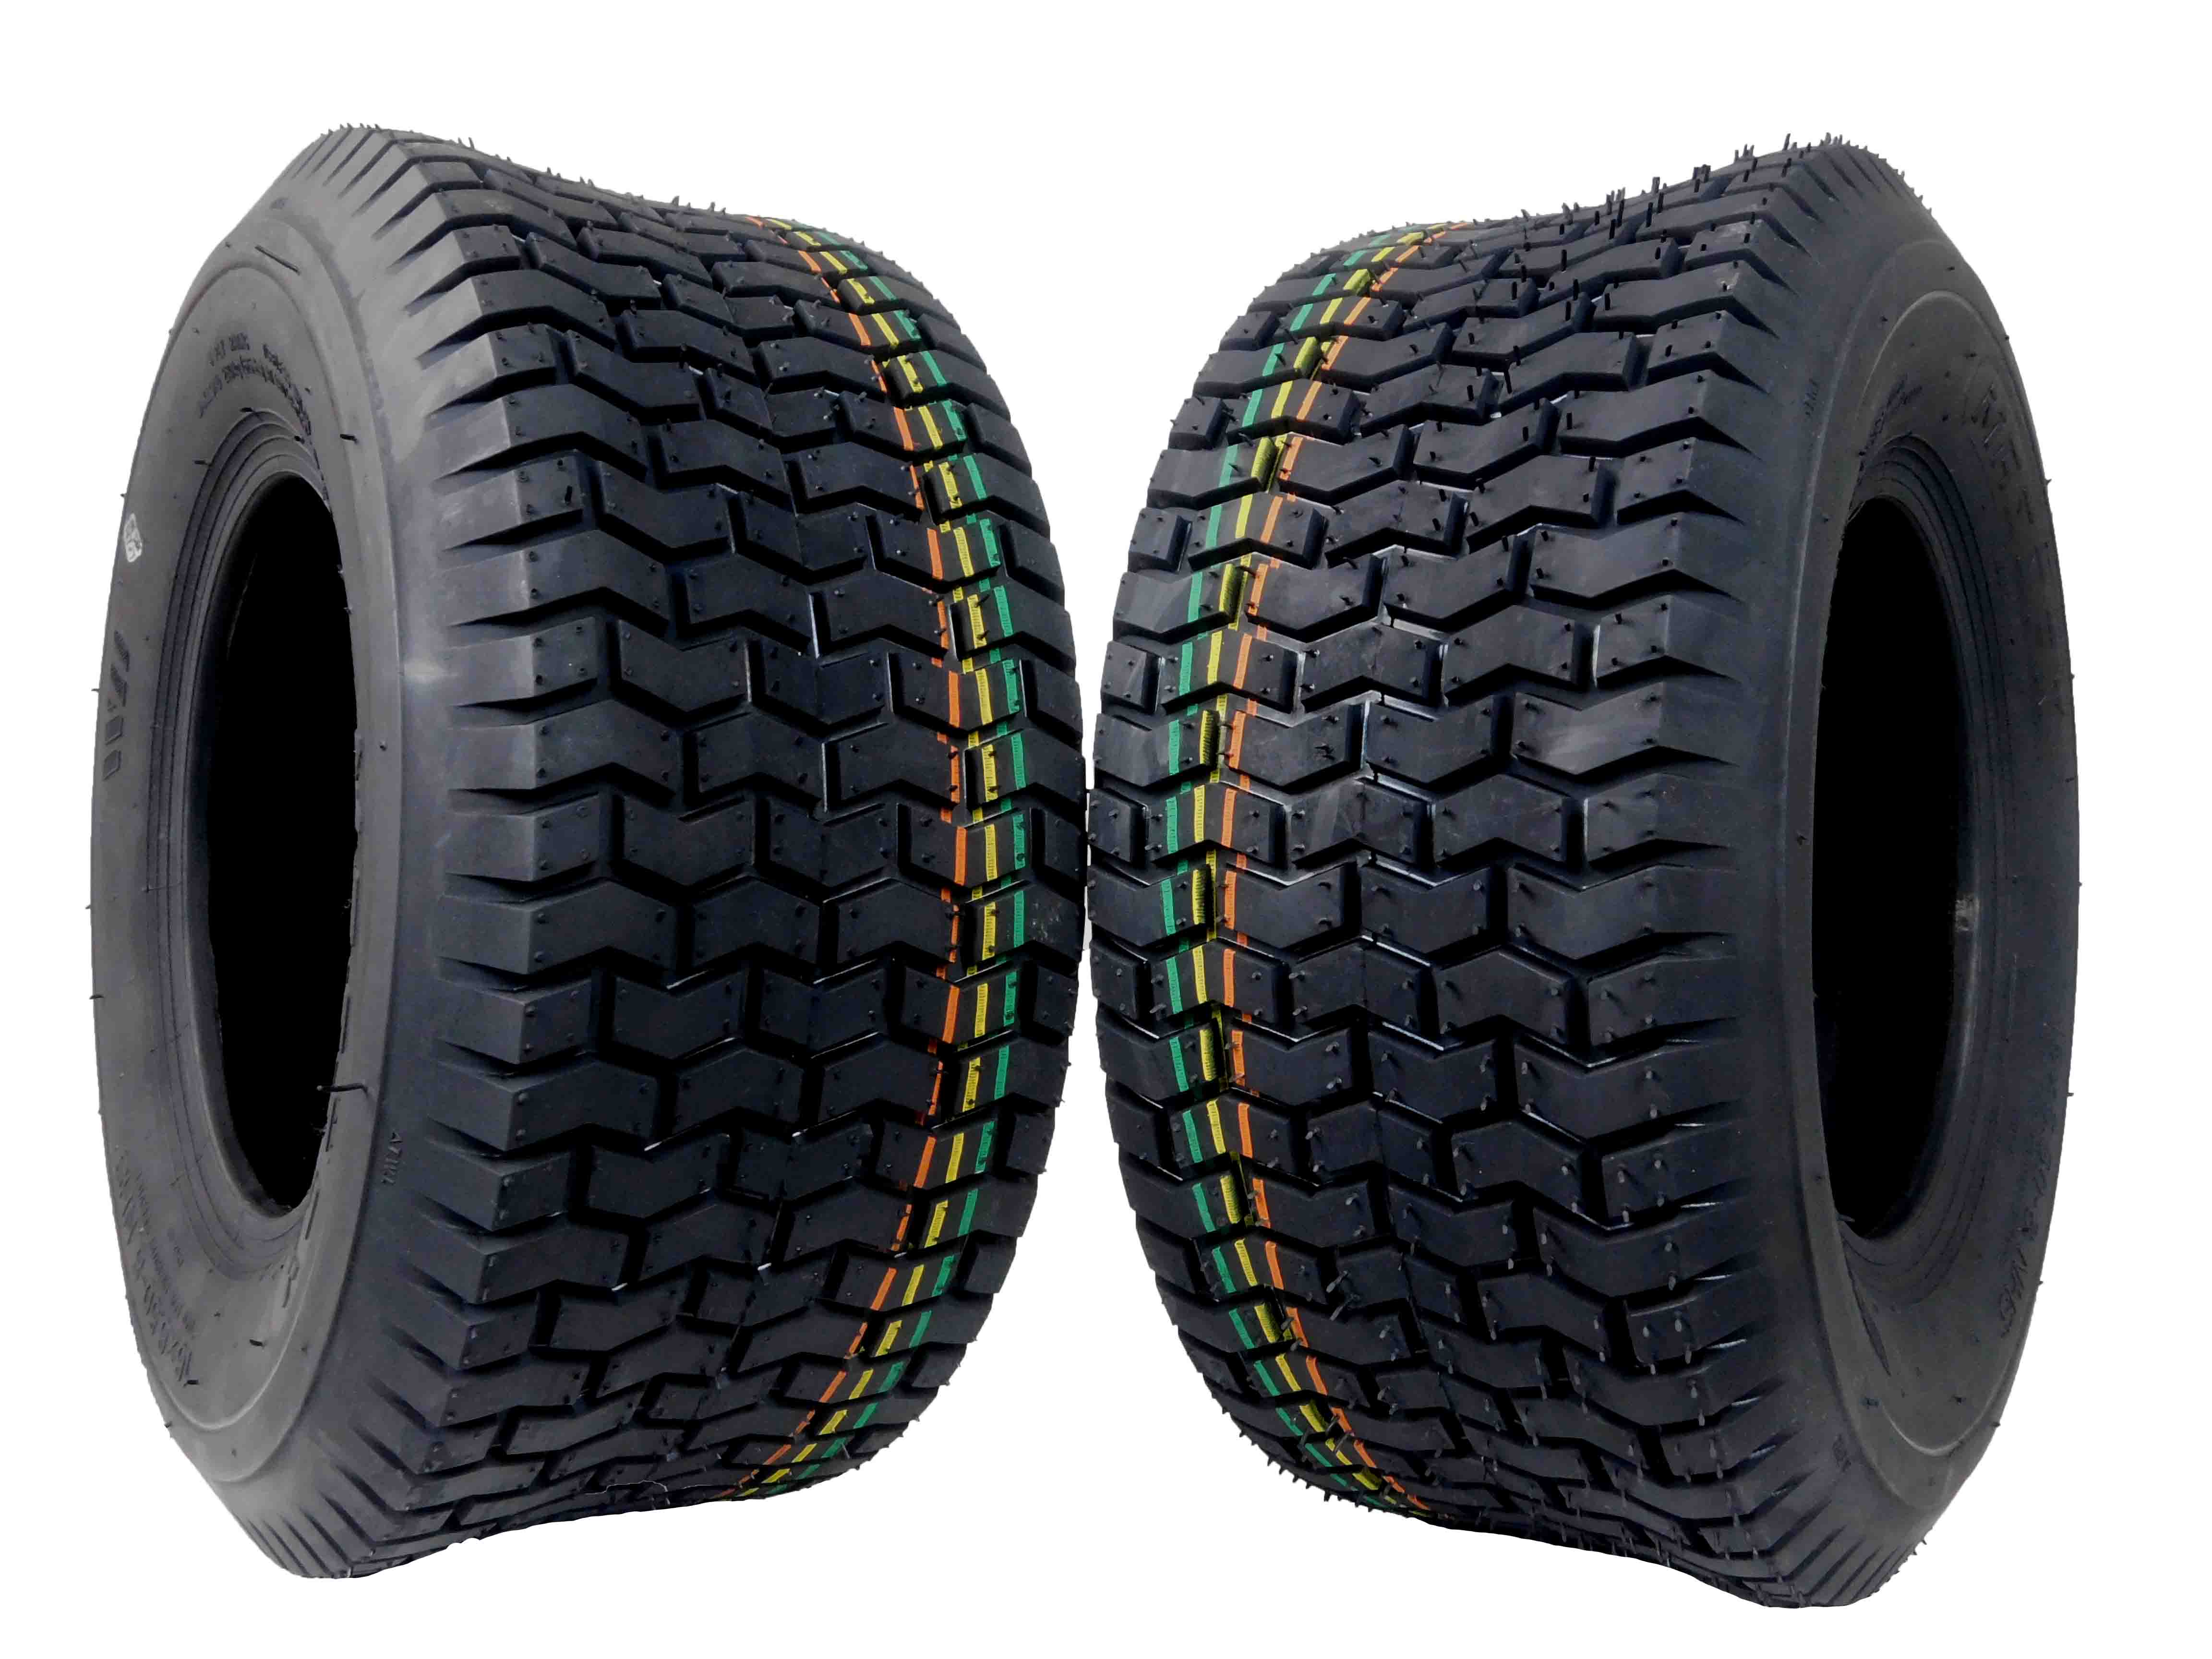 MASSFX 16x6.5-8 Lawn & Garden, Lawn Mower & Tractor Tires 4 Ply with 7mm Tread Depth (2 Pack) - image 1 of 9